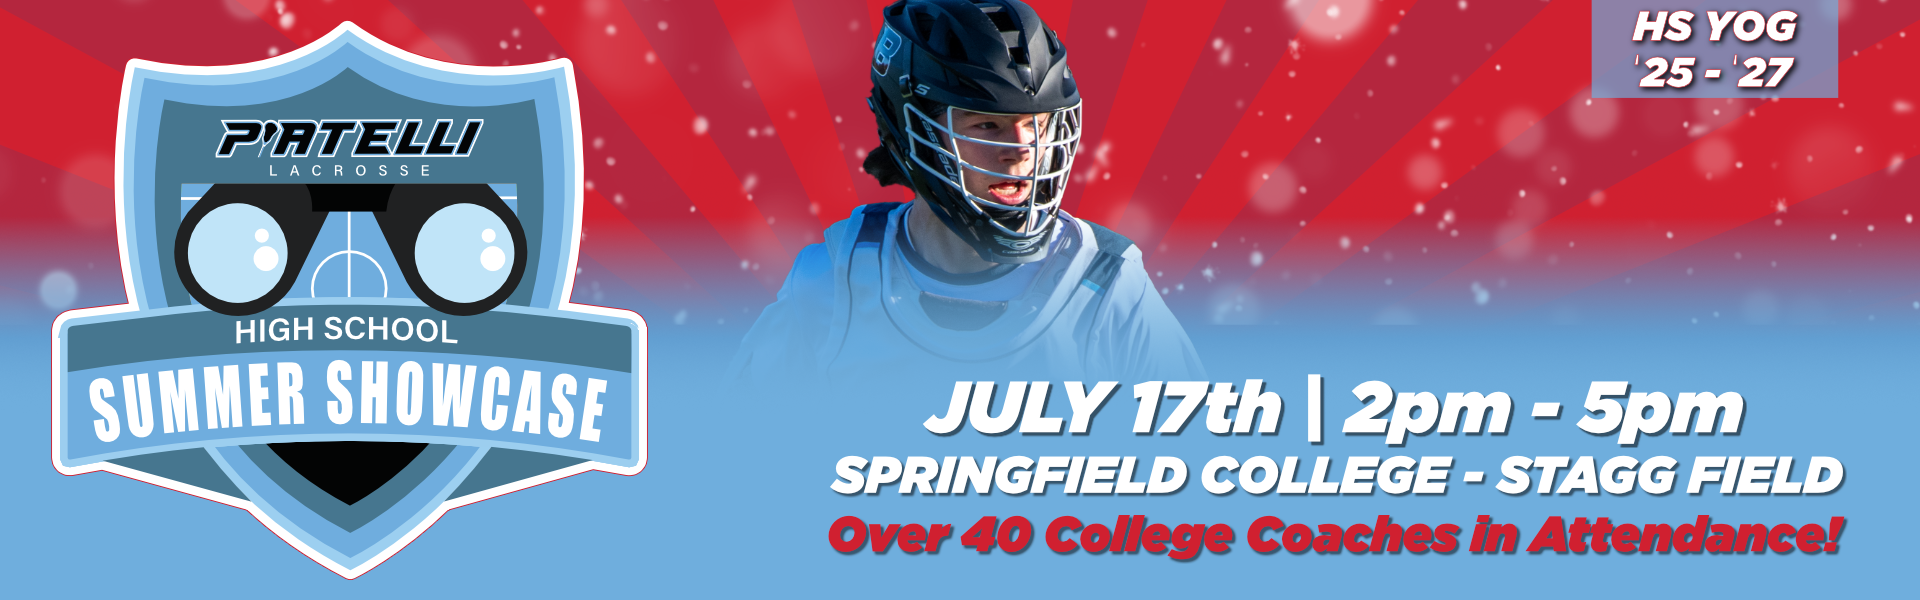 Piatelli Lacrosse 2024 Summer Showcase on July 17th at Springfield College